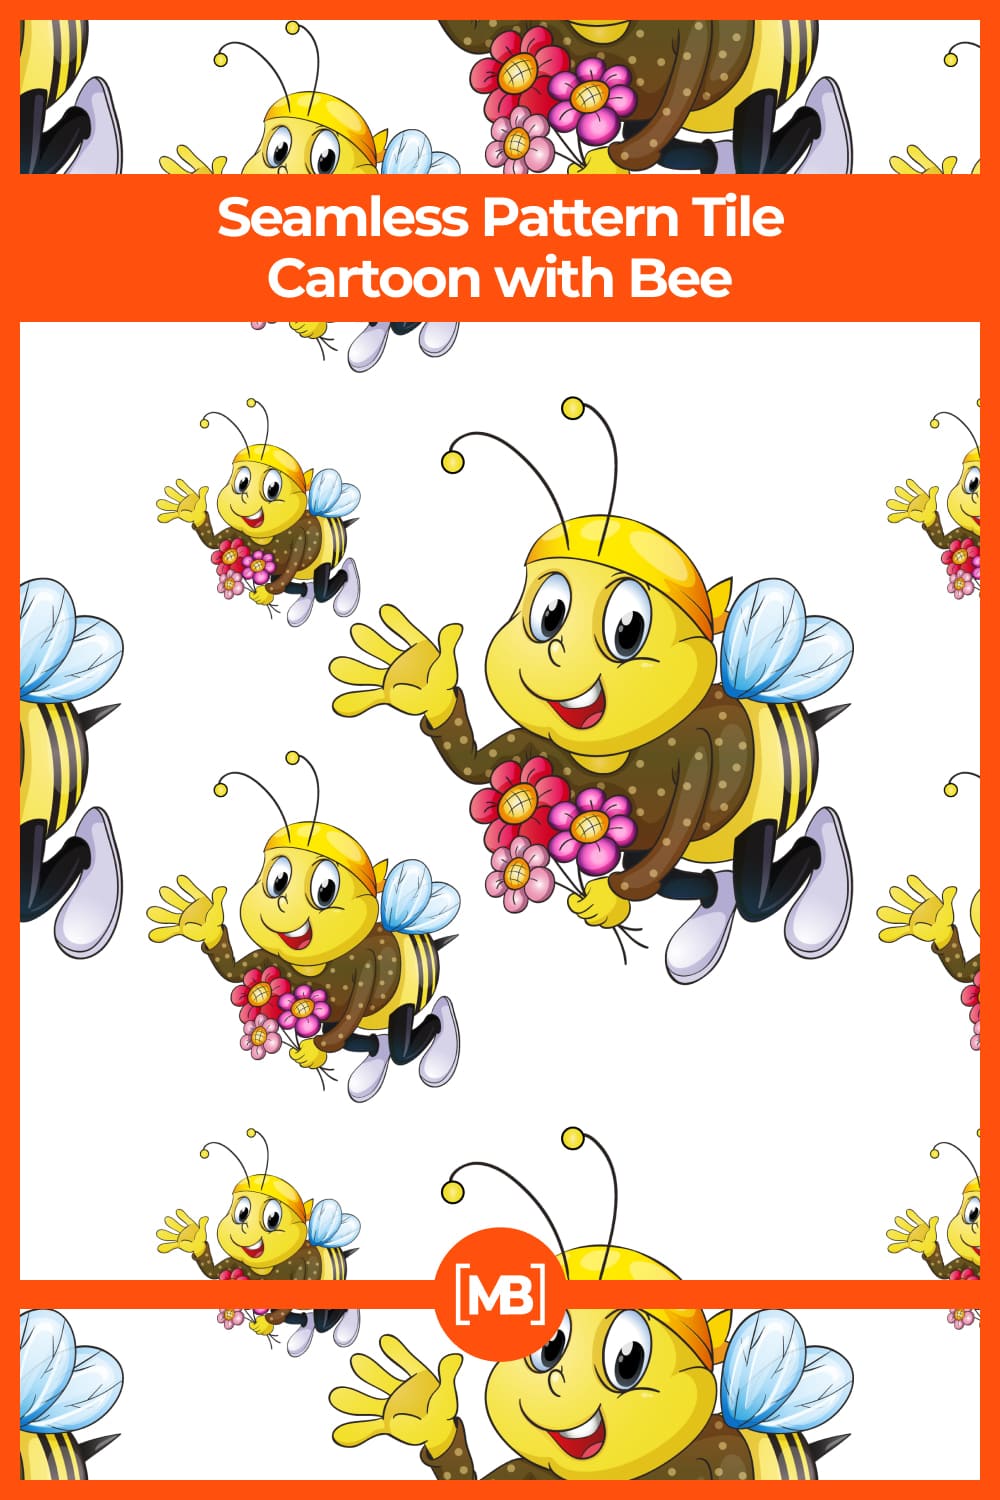 Seamless Pattern Tile Cartoon with Bee.